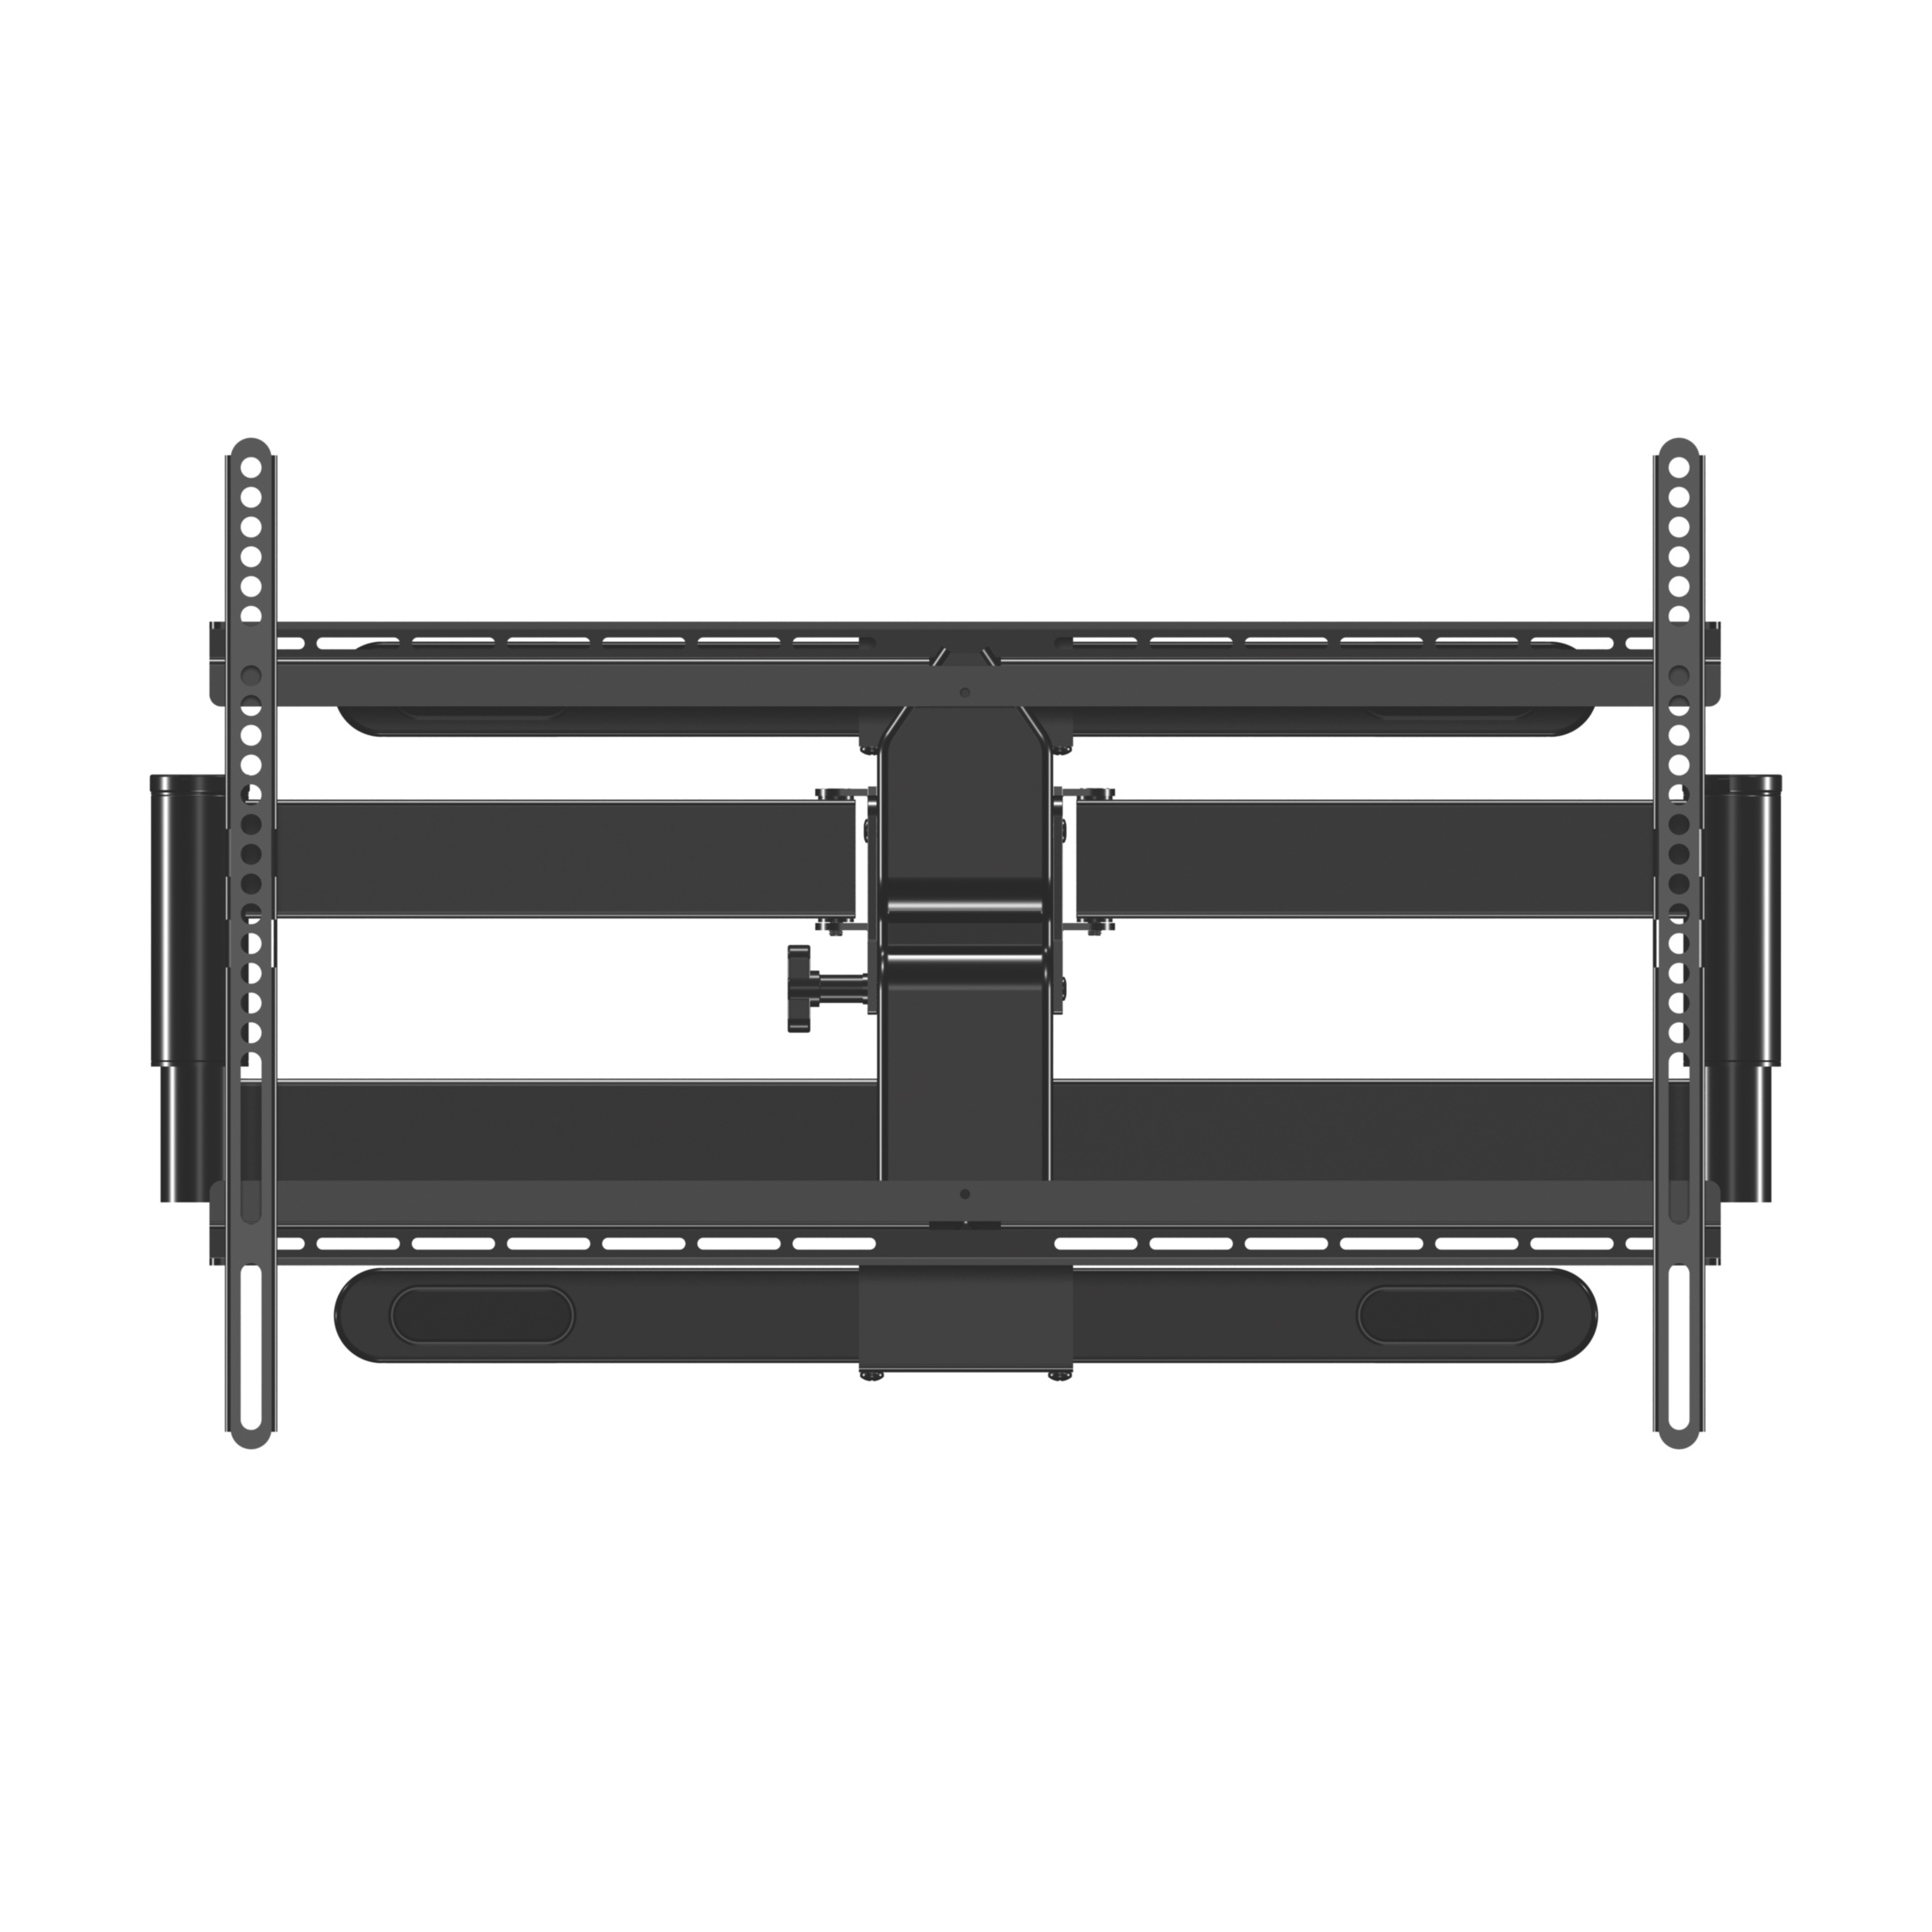 SANUS VuePoint Full-Motion TV Mount for TVs 42"-85" up to 120 lbs - image 4 of 14